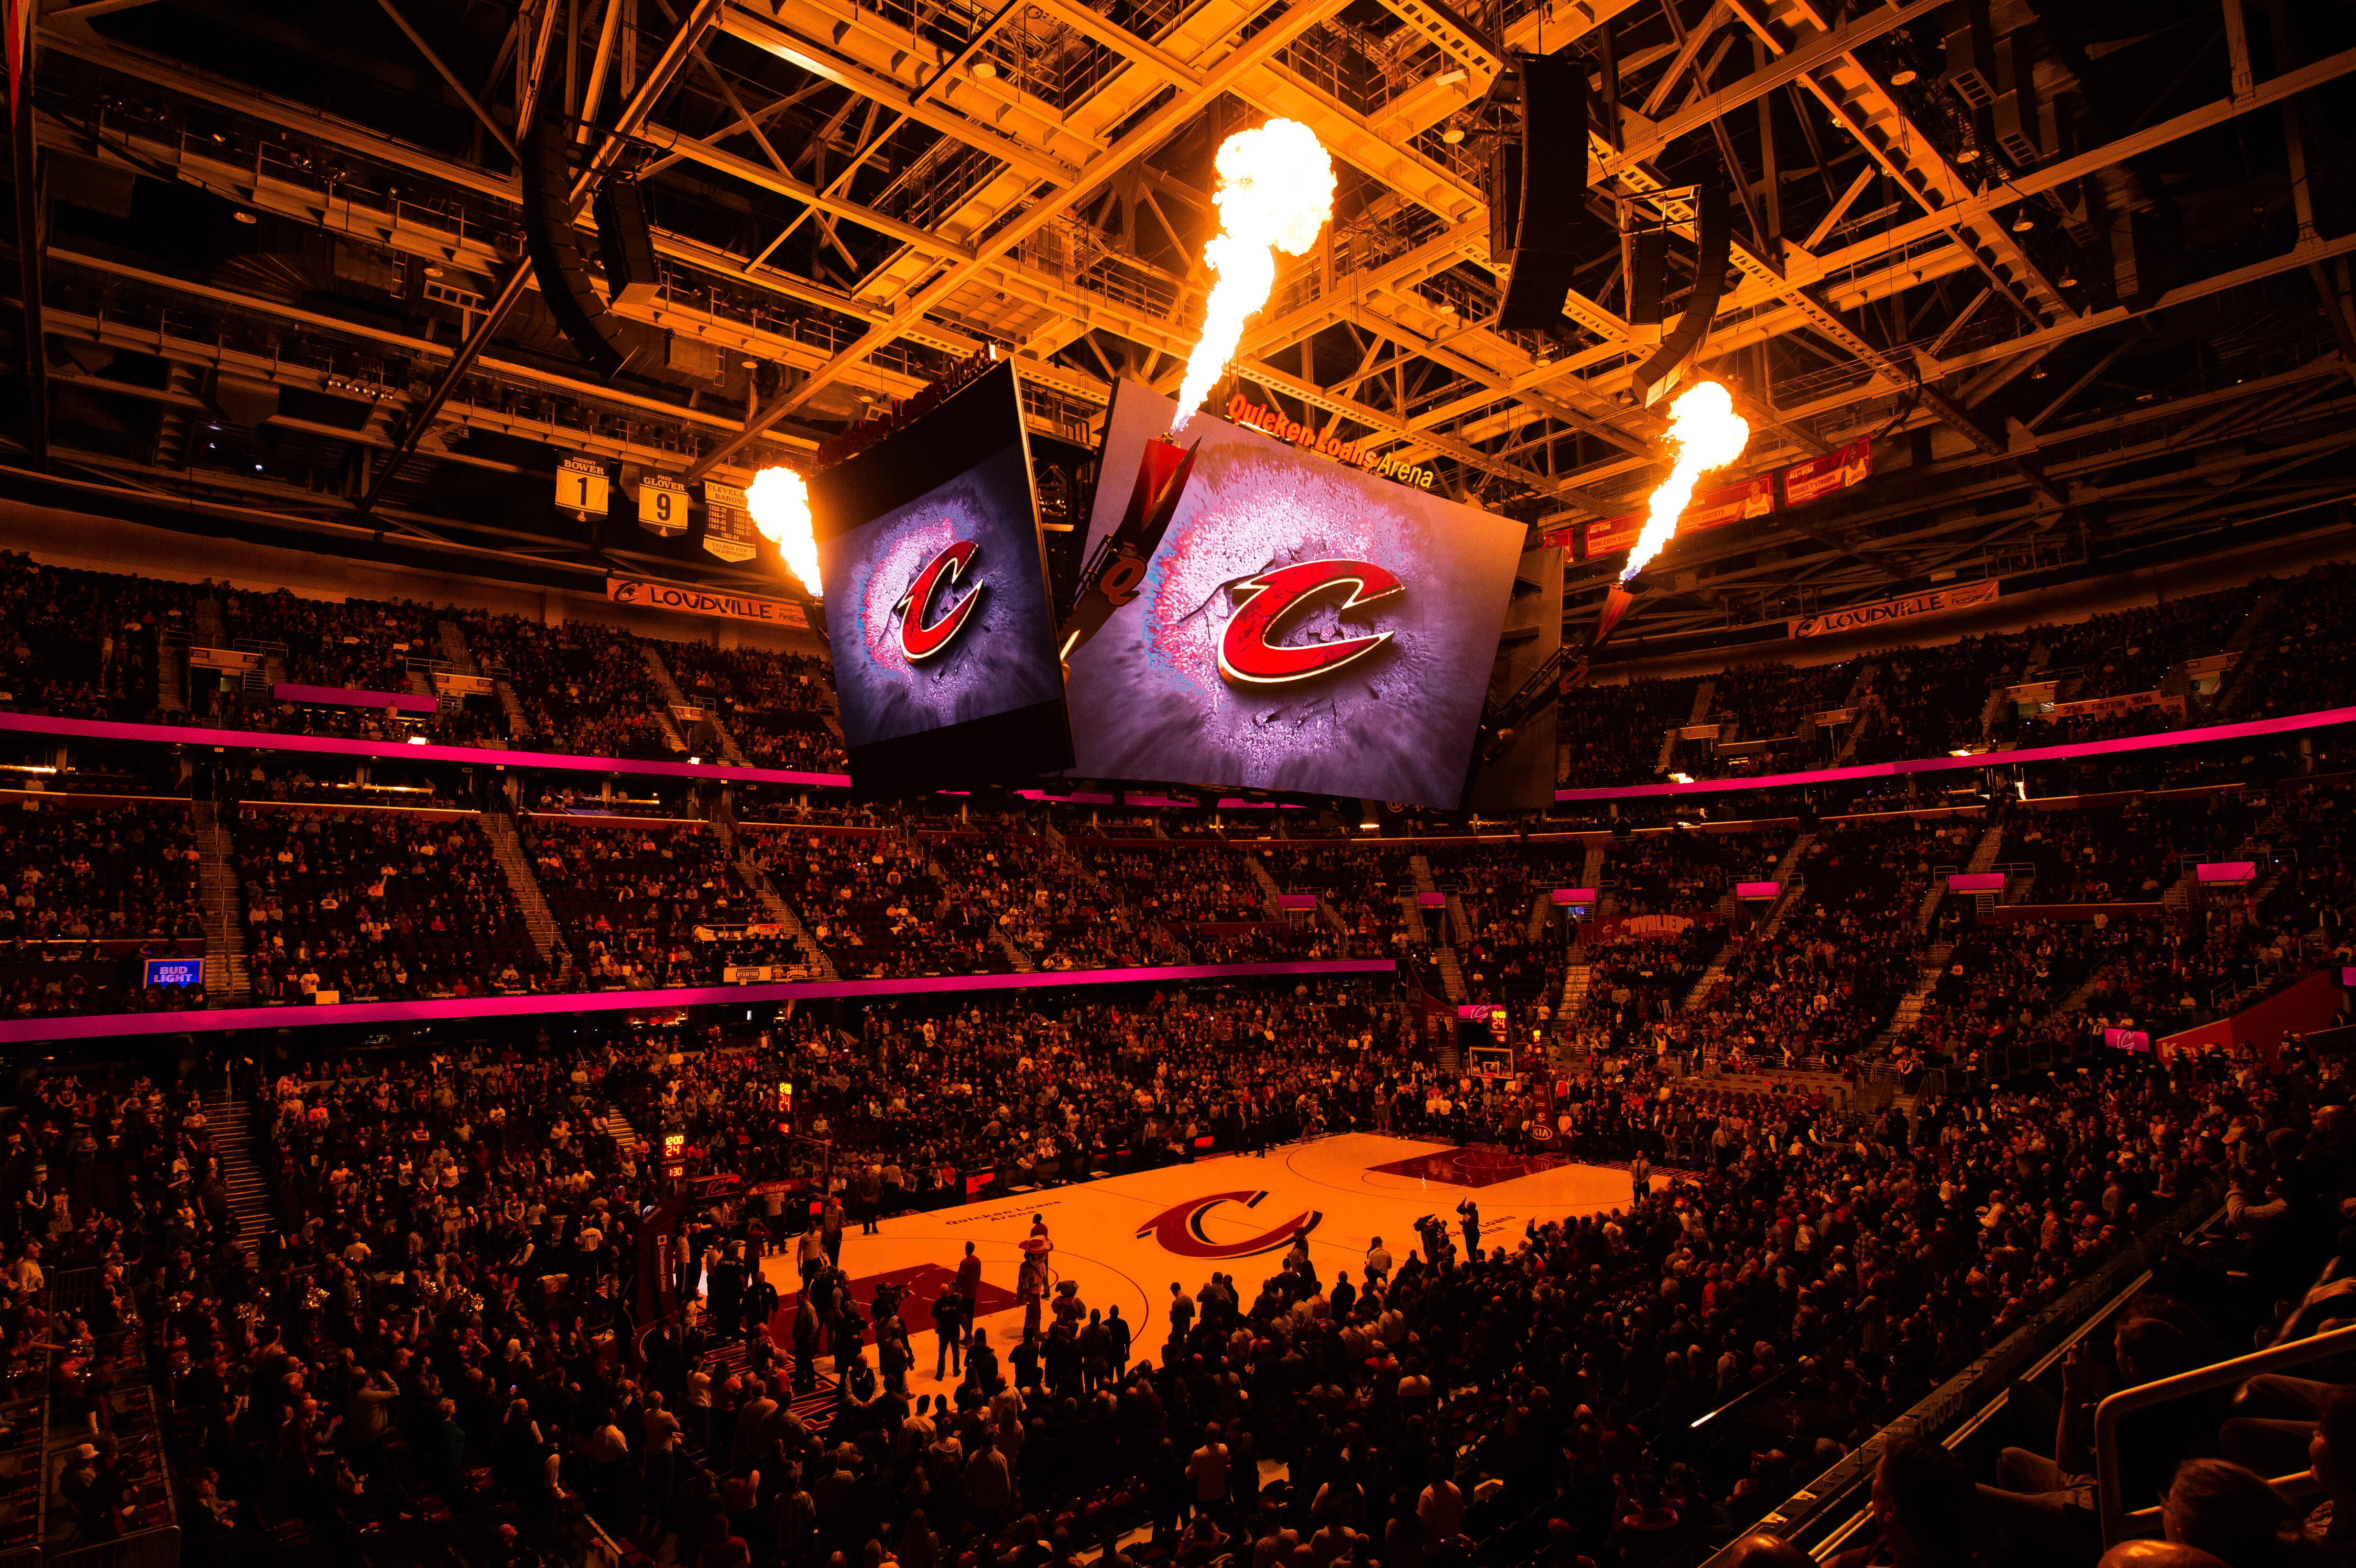 CLEVELAND, OH - NOVEMBER 15: A general stadium view during Cleveland Cavaliers players introductions prior to the game against the Toronto Raptors at Quicken Loans Arena on November 15, 2016 in Cleveland, Ohio. The Cavaliers defeated the Raptors 121-117. 